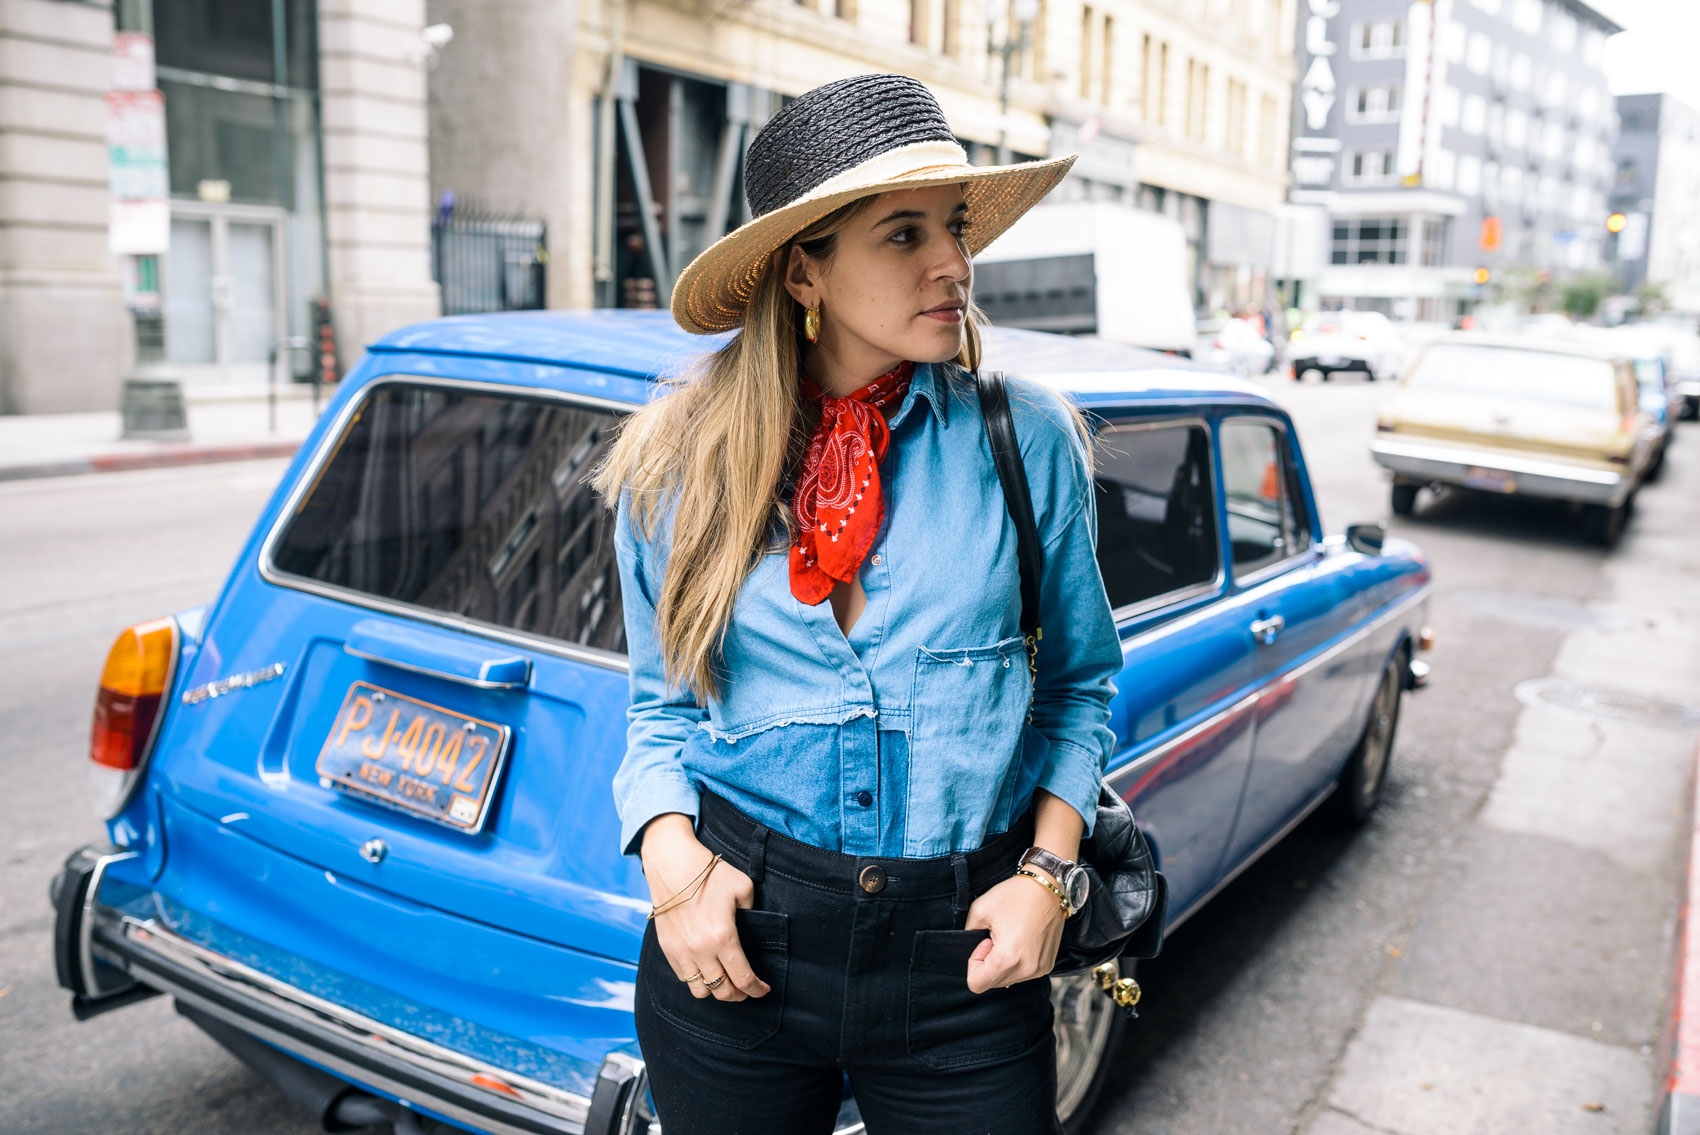 Maristella wearing a cool casual outfit idea with a neck scarf bandana, straw two tone hat from Zara, patchwork denim shirt and high waisted black jeans from Uterqüe